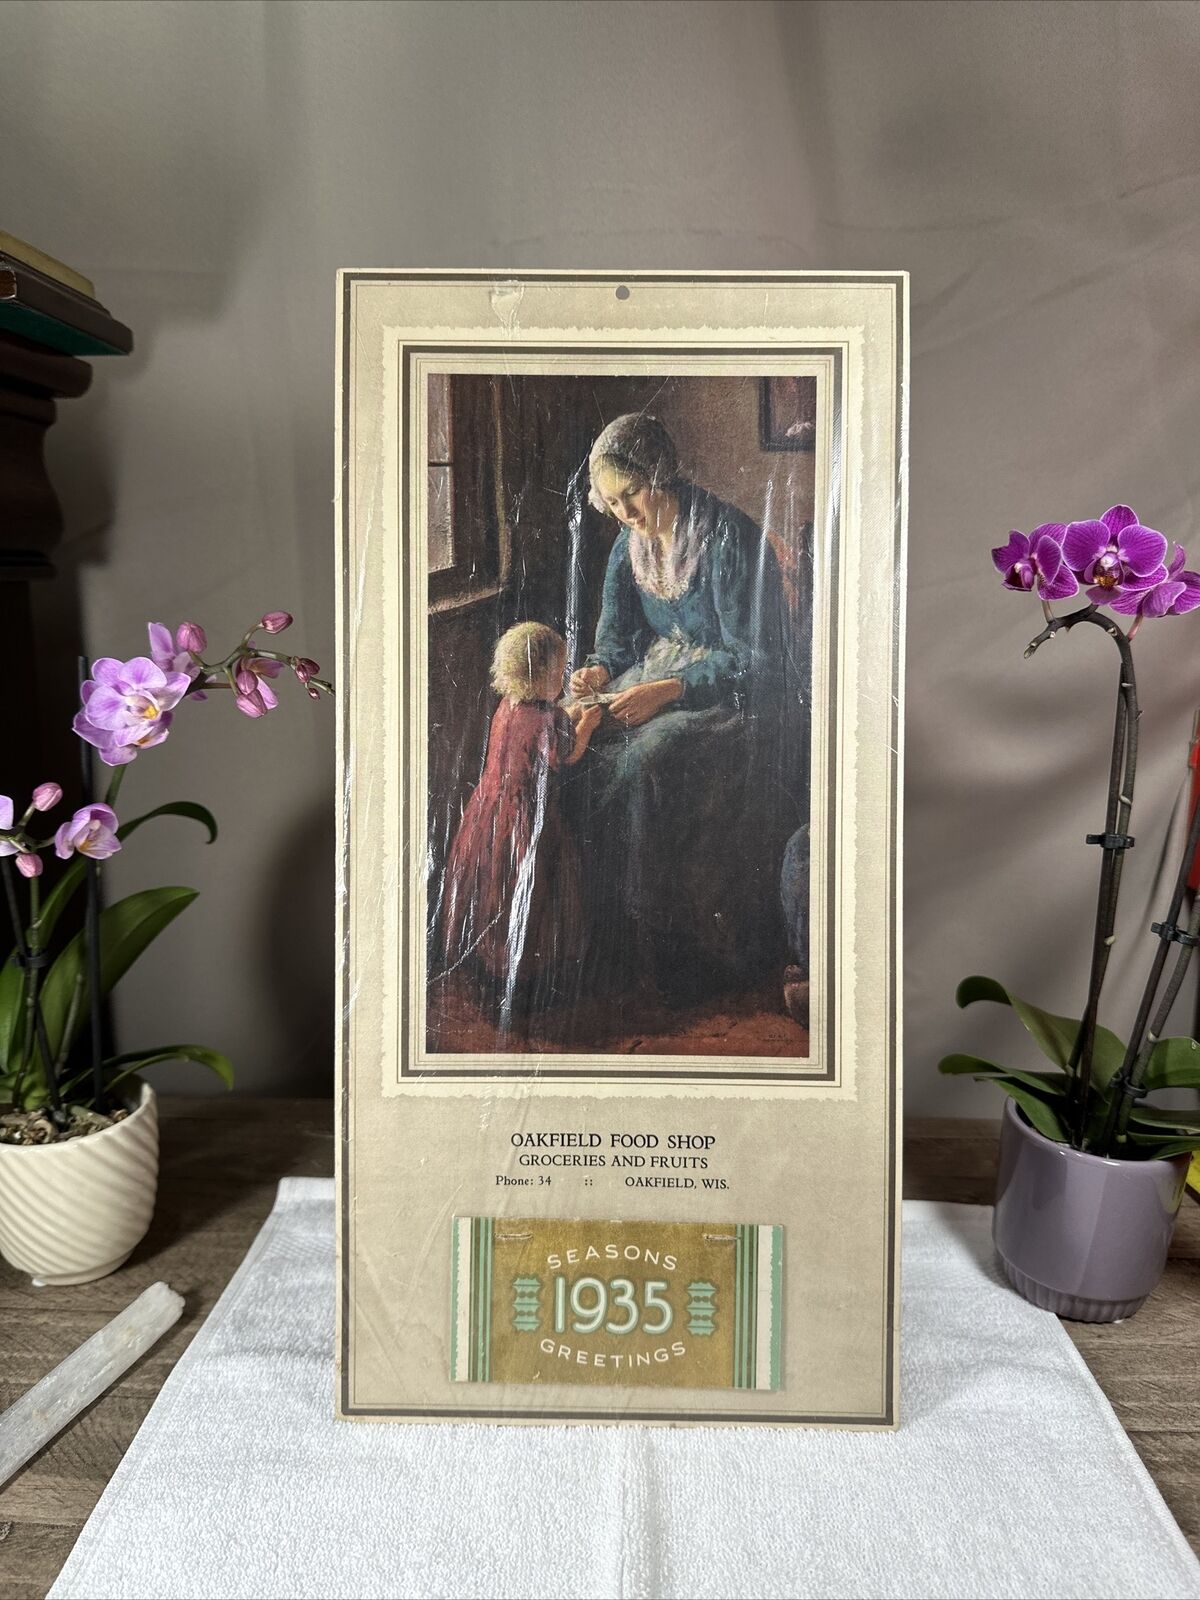 Antique 1935 Advertising Calendar Lithographic OAKFIELD FOOD SHOP RARE Beauty